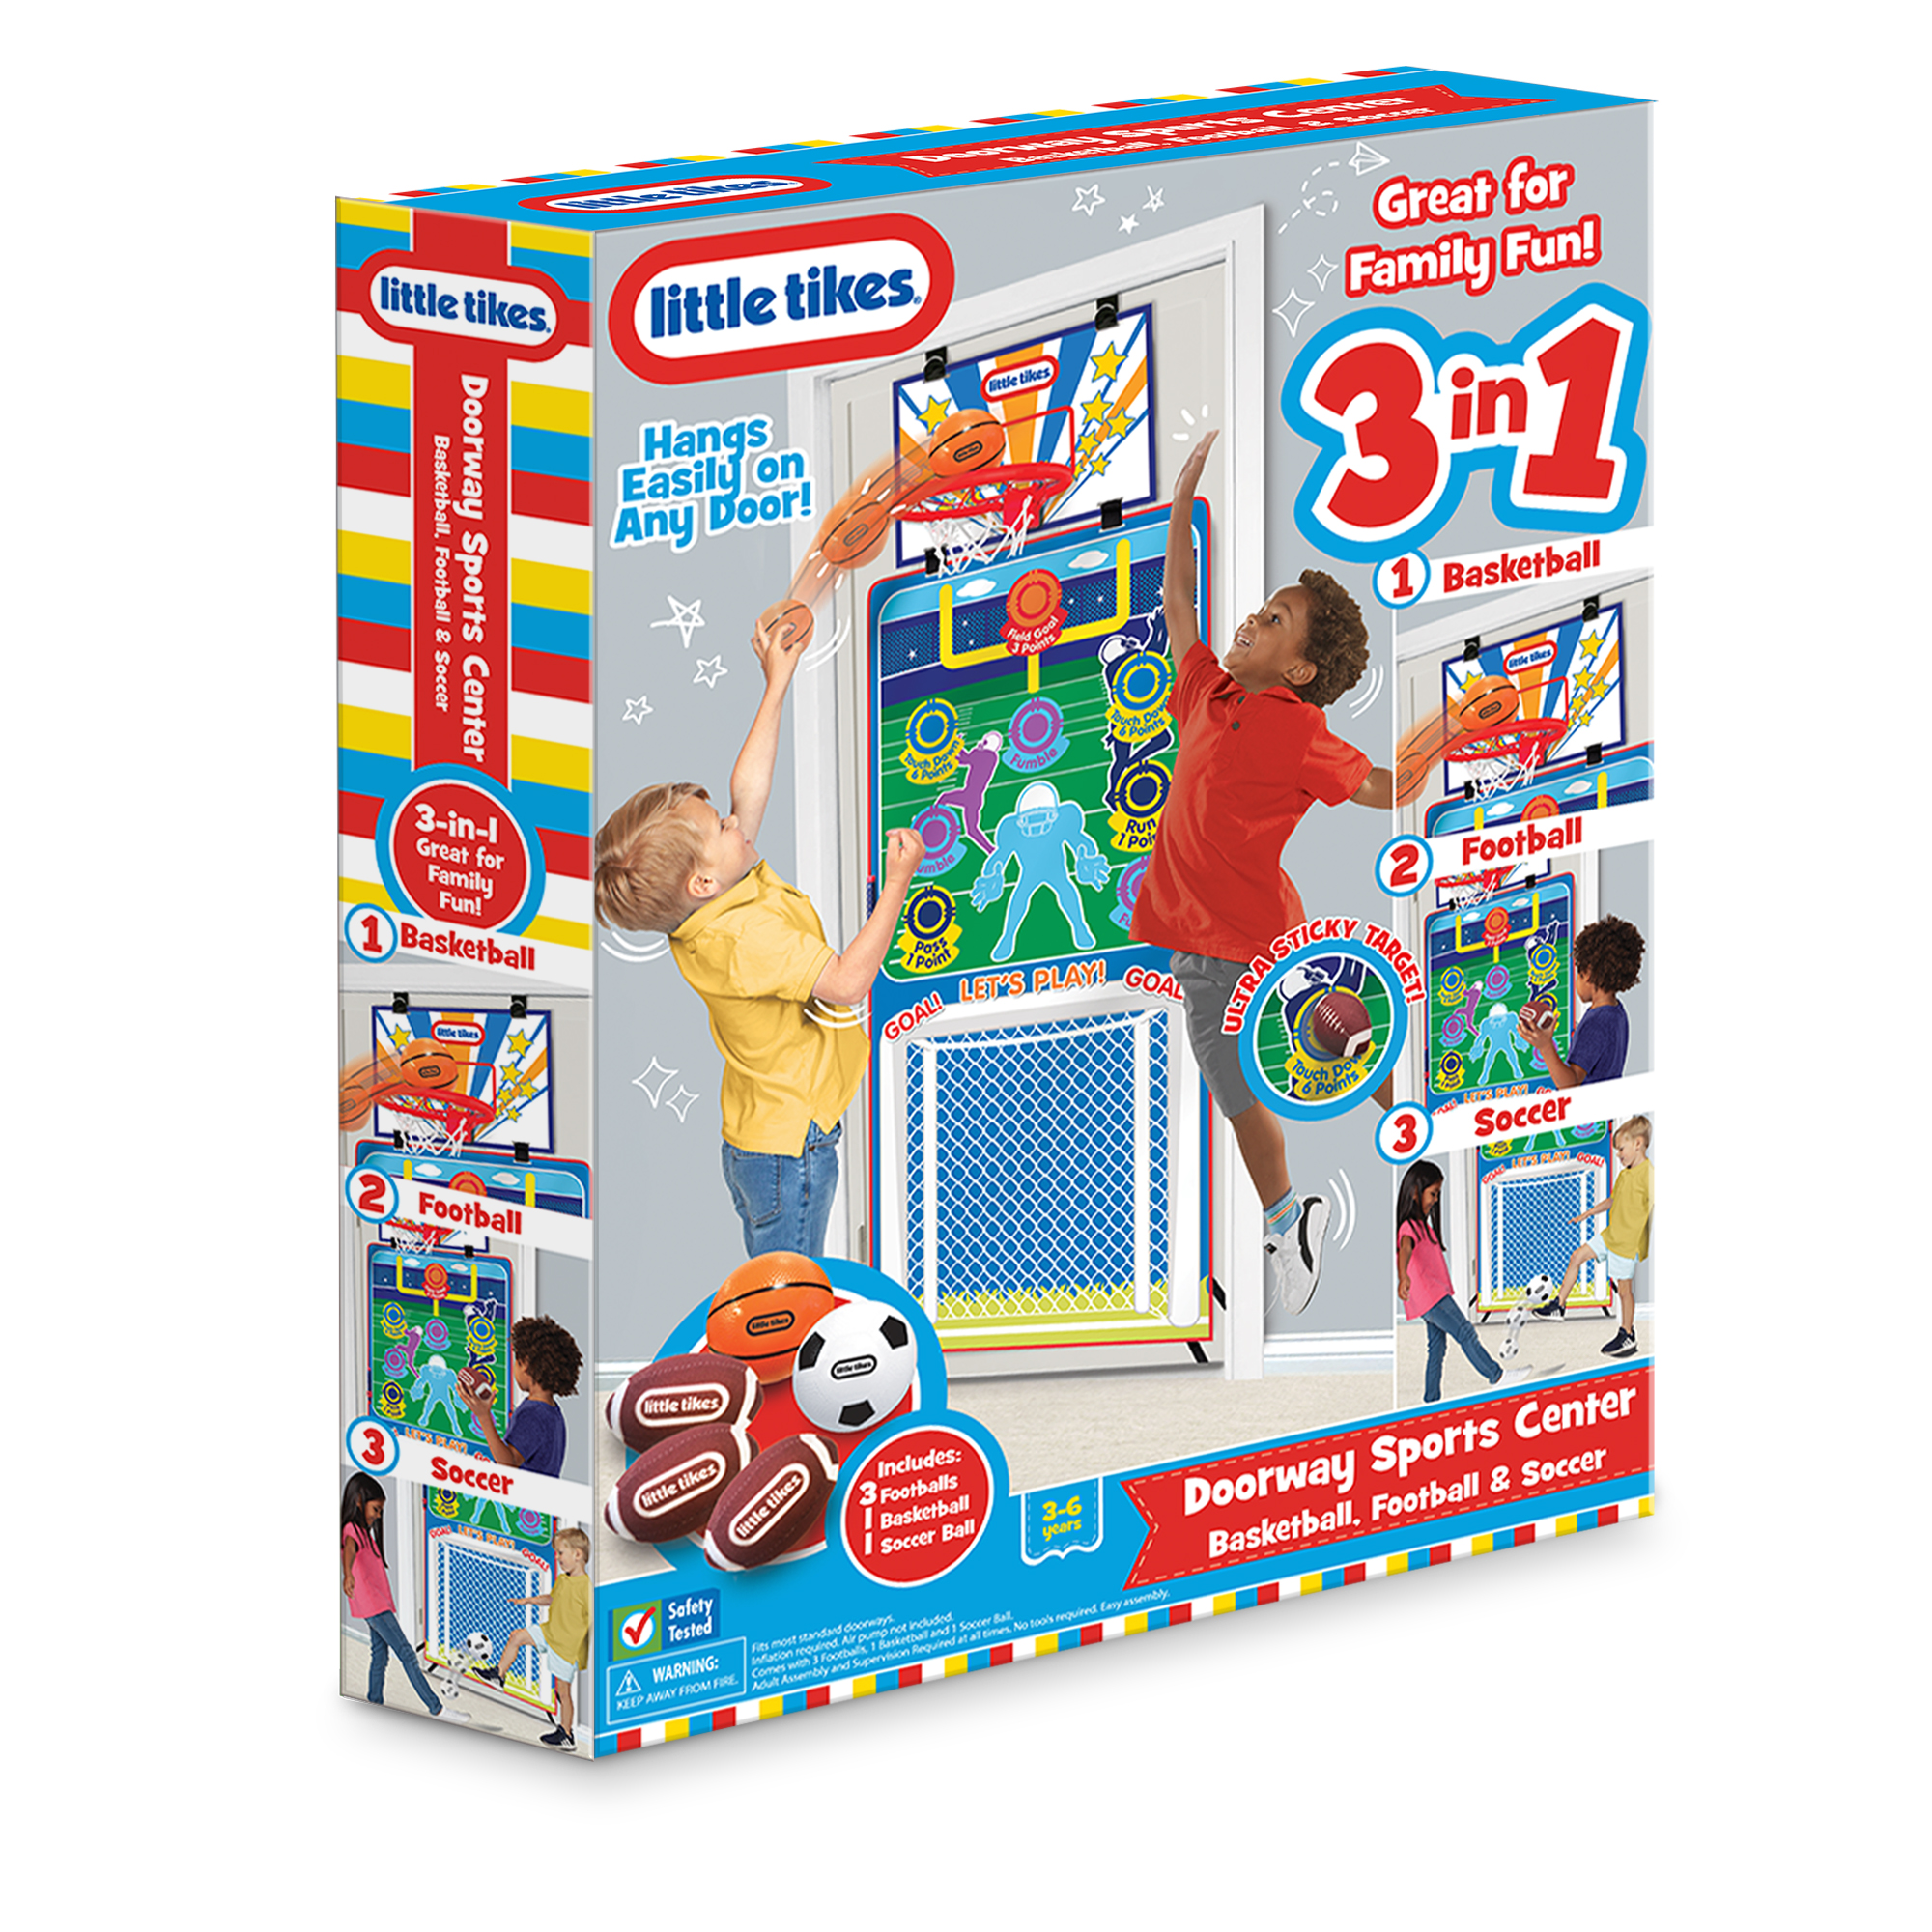 Little Tikes 3-in-1 Doorway Sports Center - Basketball, Football, Soccer for Kids 3+ - image 1 of 5